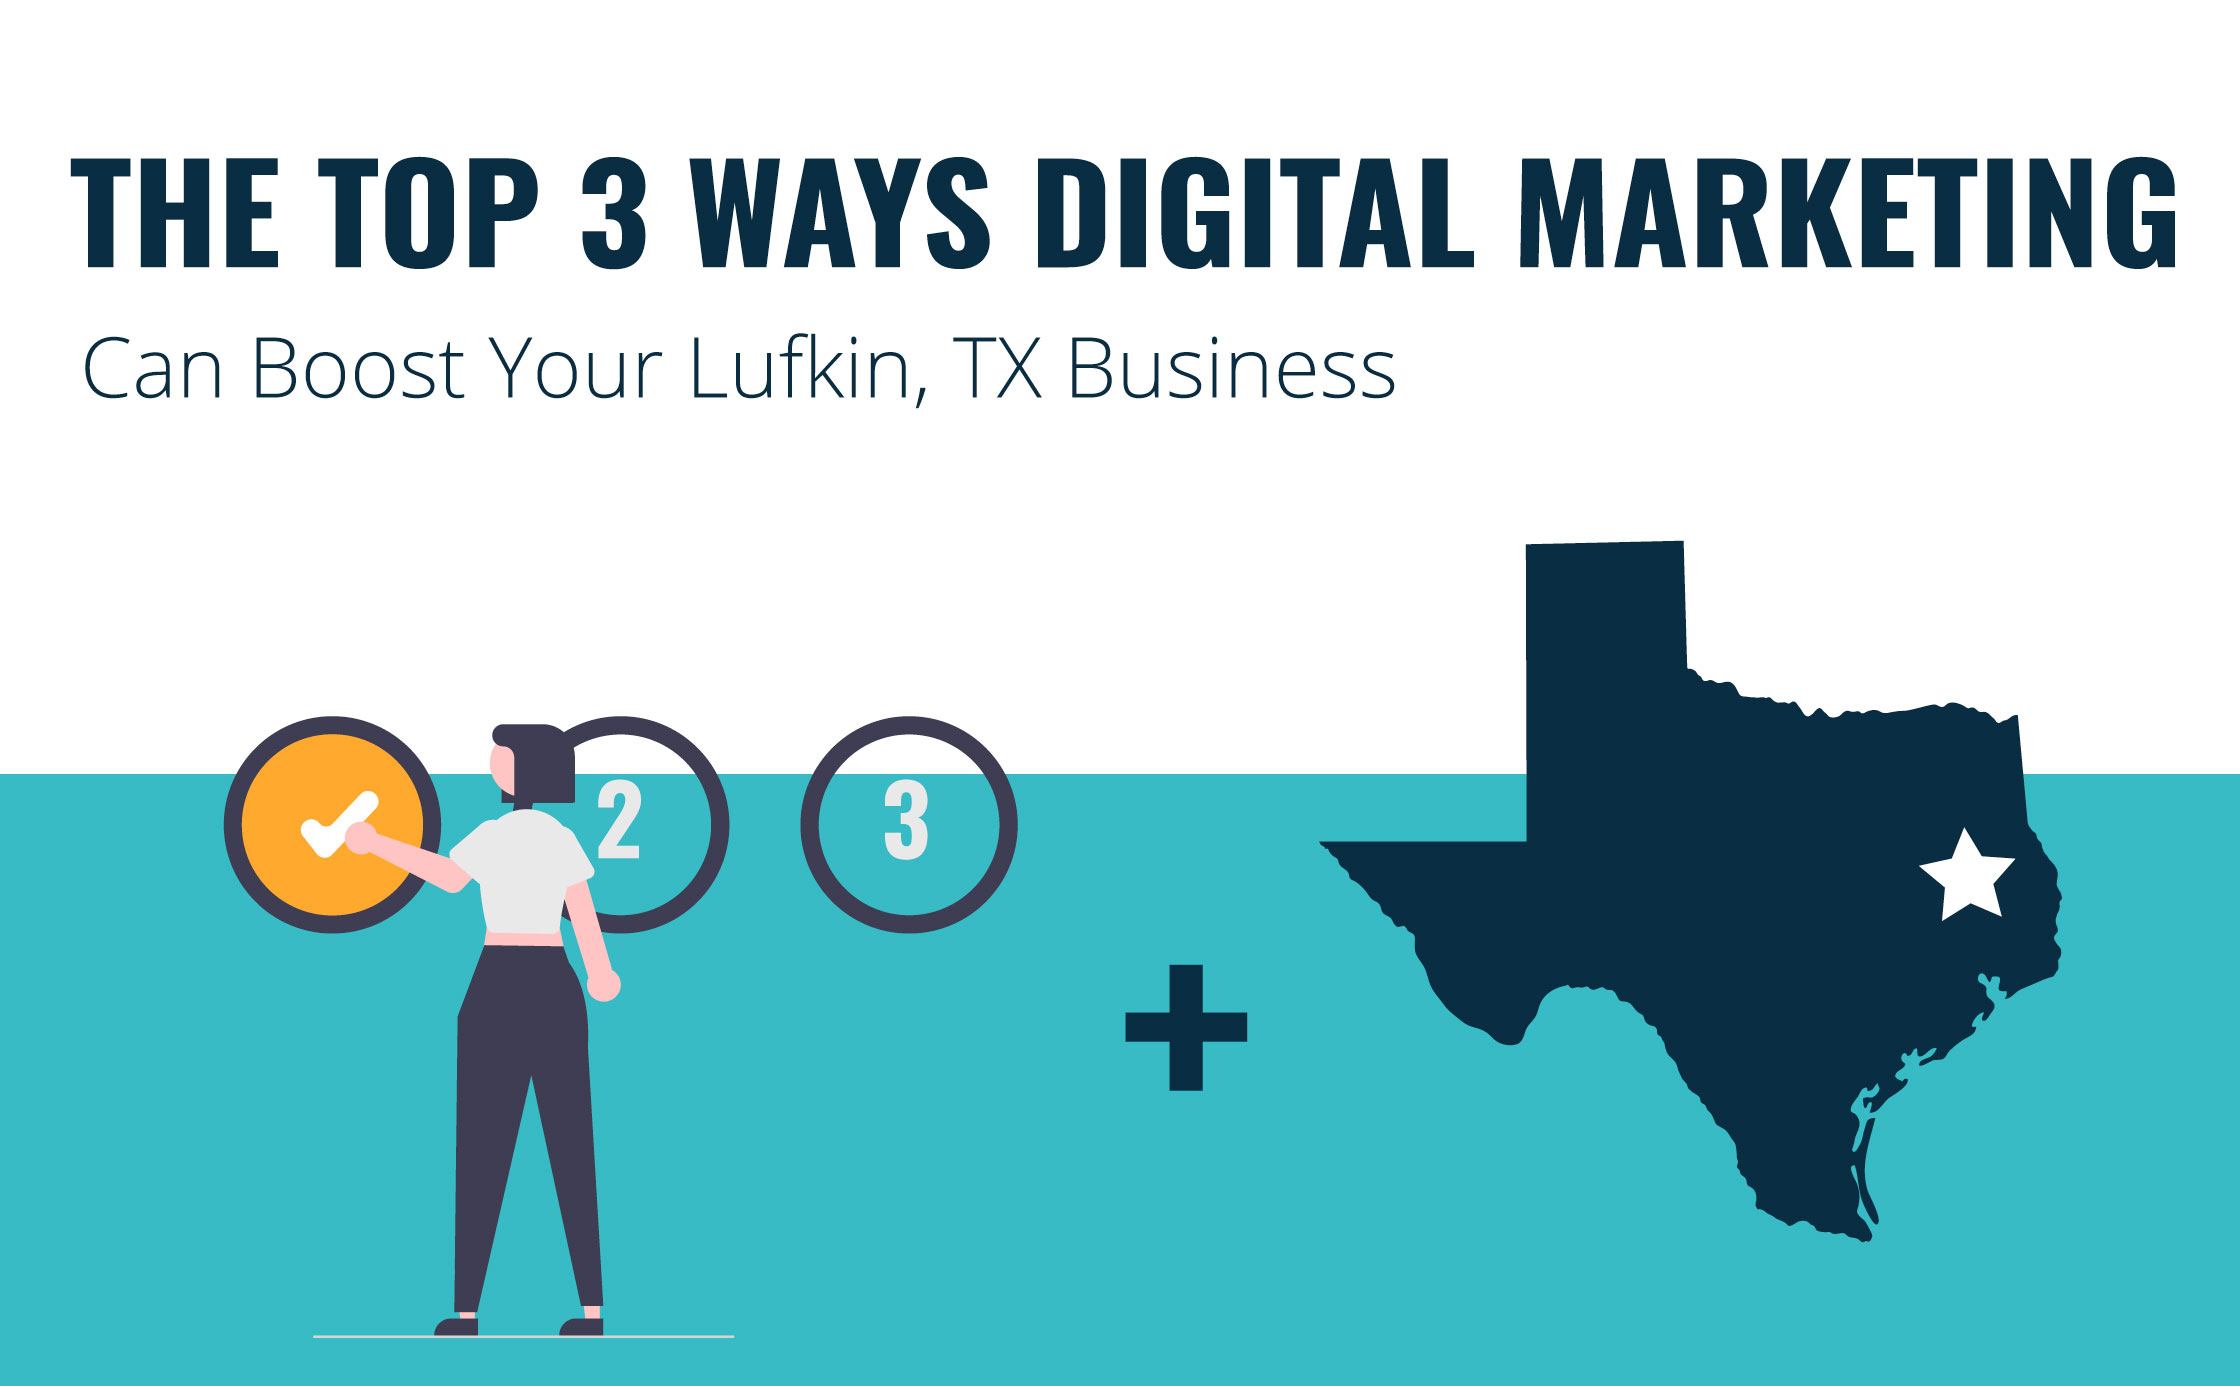 Top 3 Ways Digital Marketing Services Can Boost Your Lufkin, TX Business